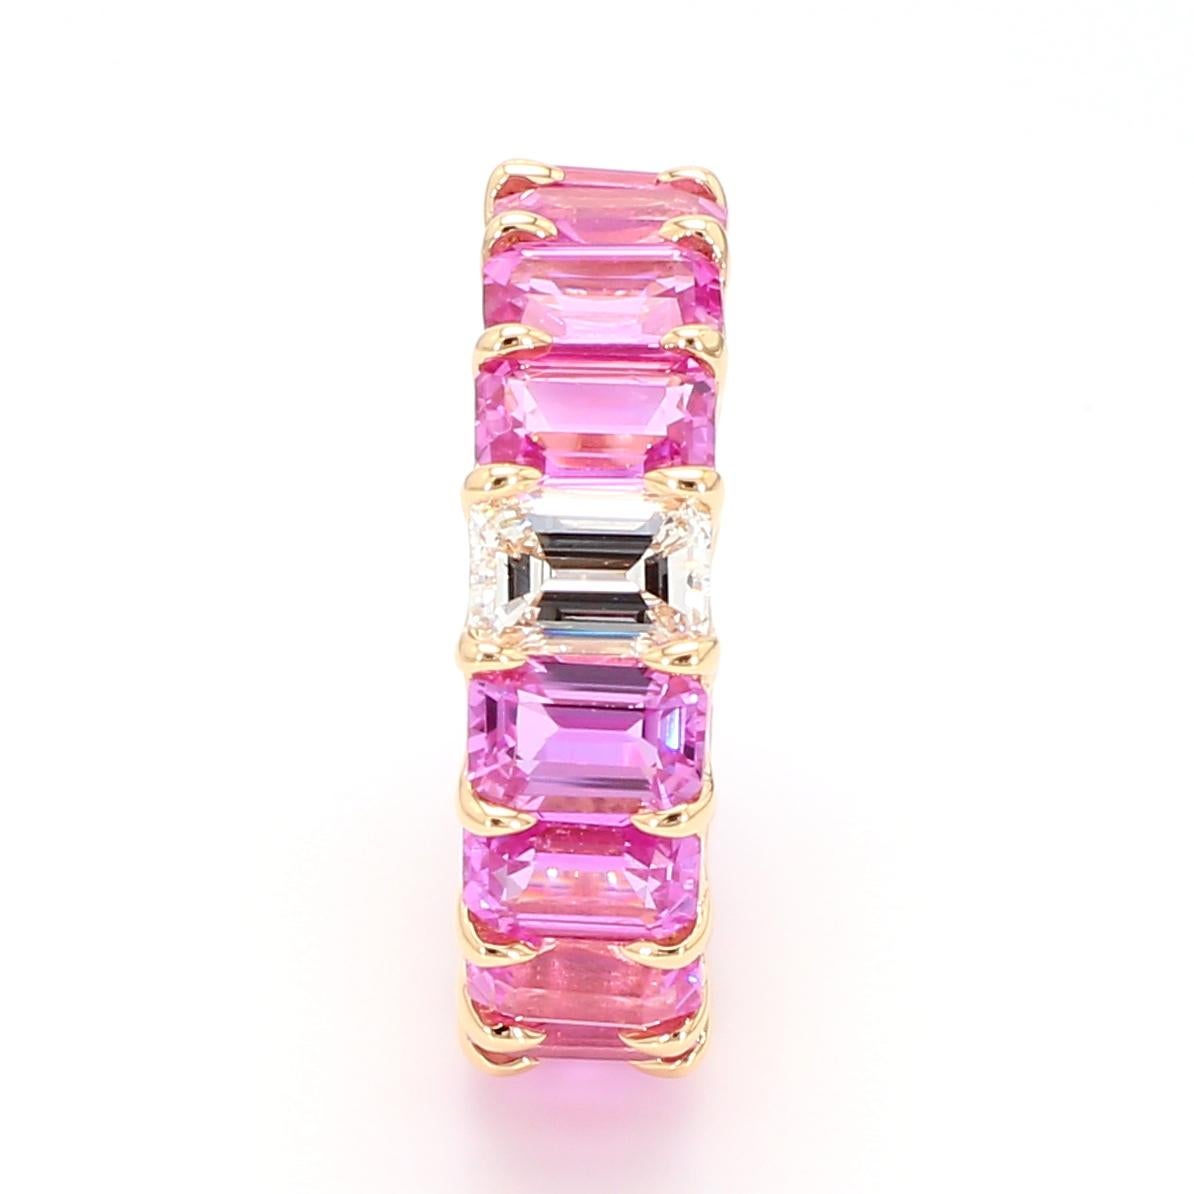 Beautiful and Forward Eternity Band.
Ring features 16 perfectly matched Pink Sapphires weighing 11.14 Carats and
1 Emerald Cut Diamond weighing 0.71 Carats.
Set in 18 Karat Rose Gold.
Size 6.
Can be worn Diamond Side up or down.